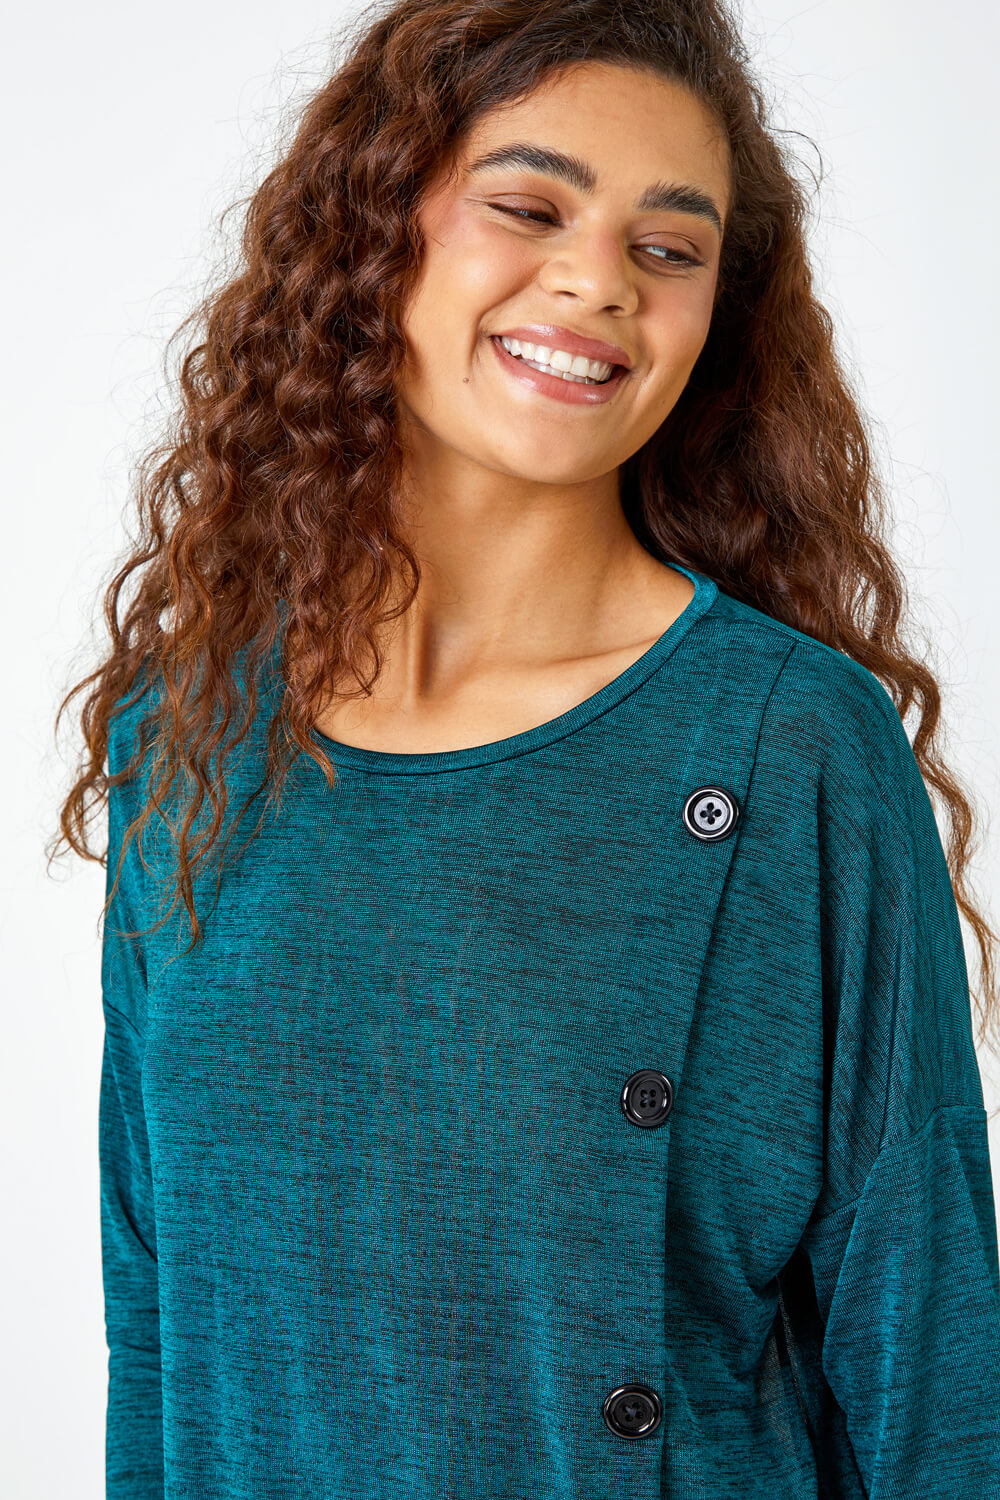 Teal Button Detail Marl Stretch Top, Image 4 of 5